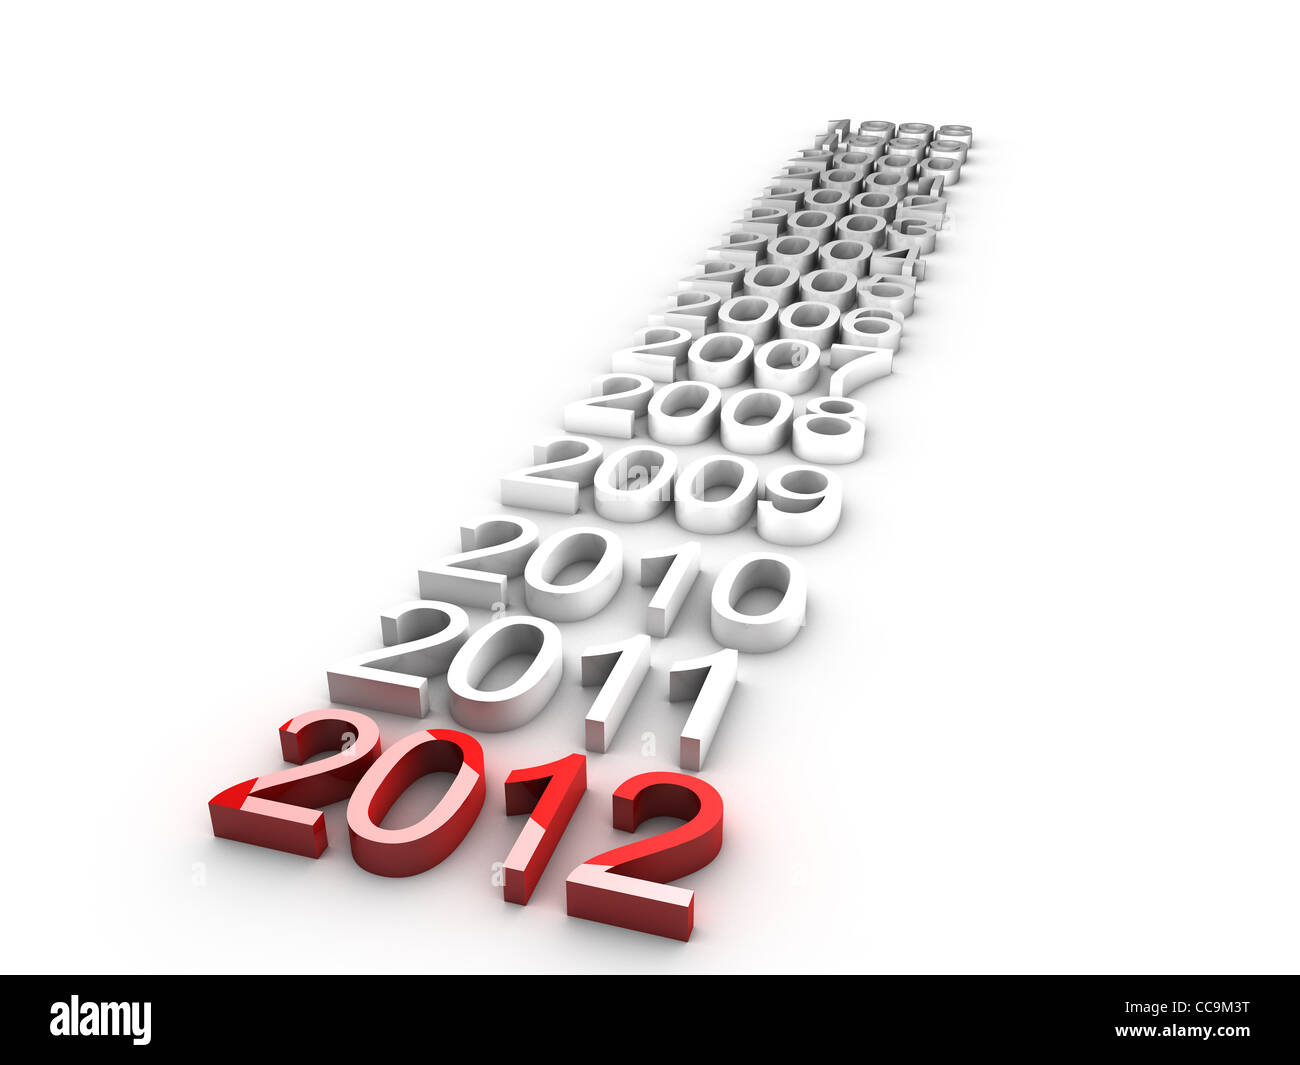 new year 2012 over white background Stock Photo